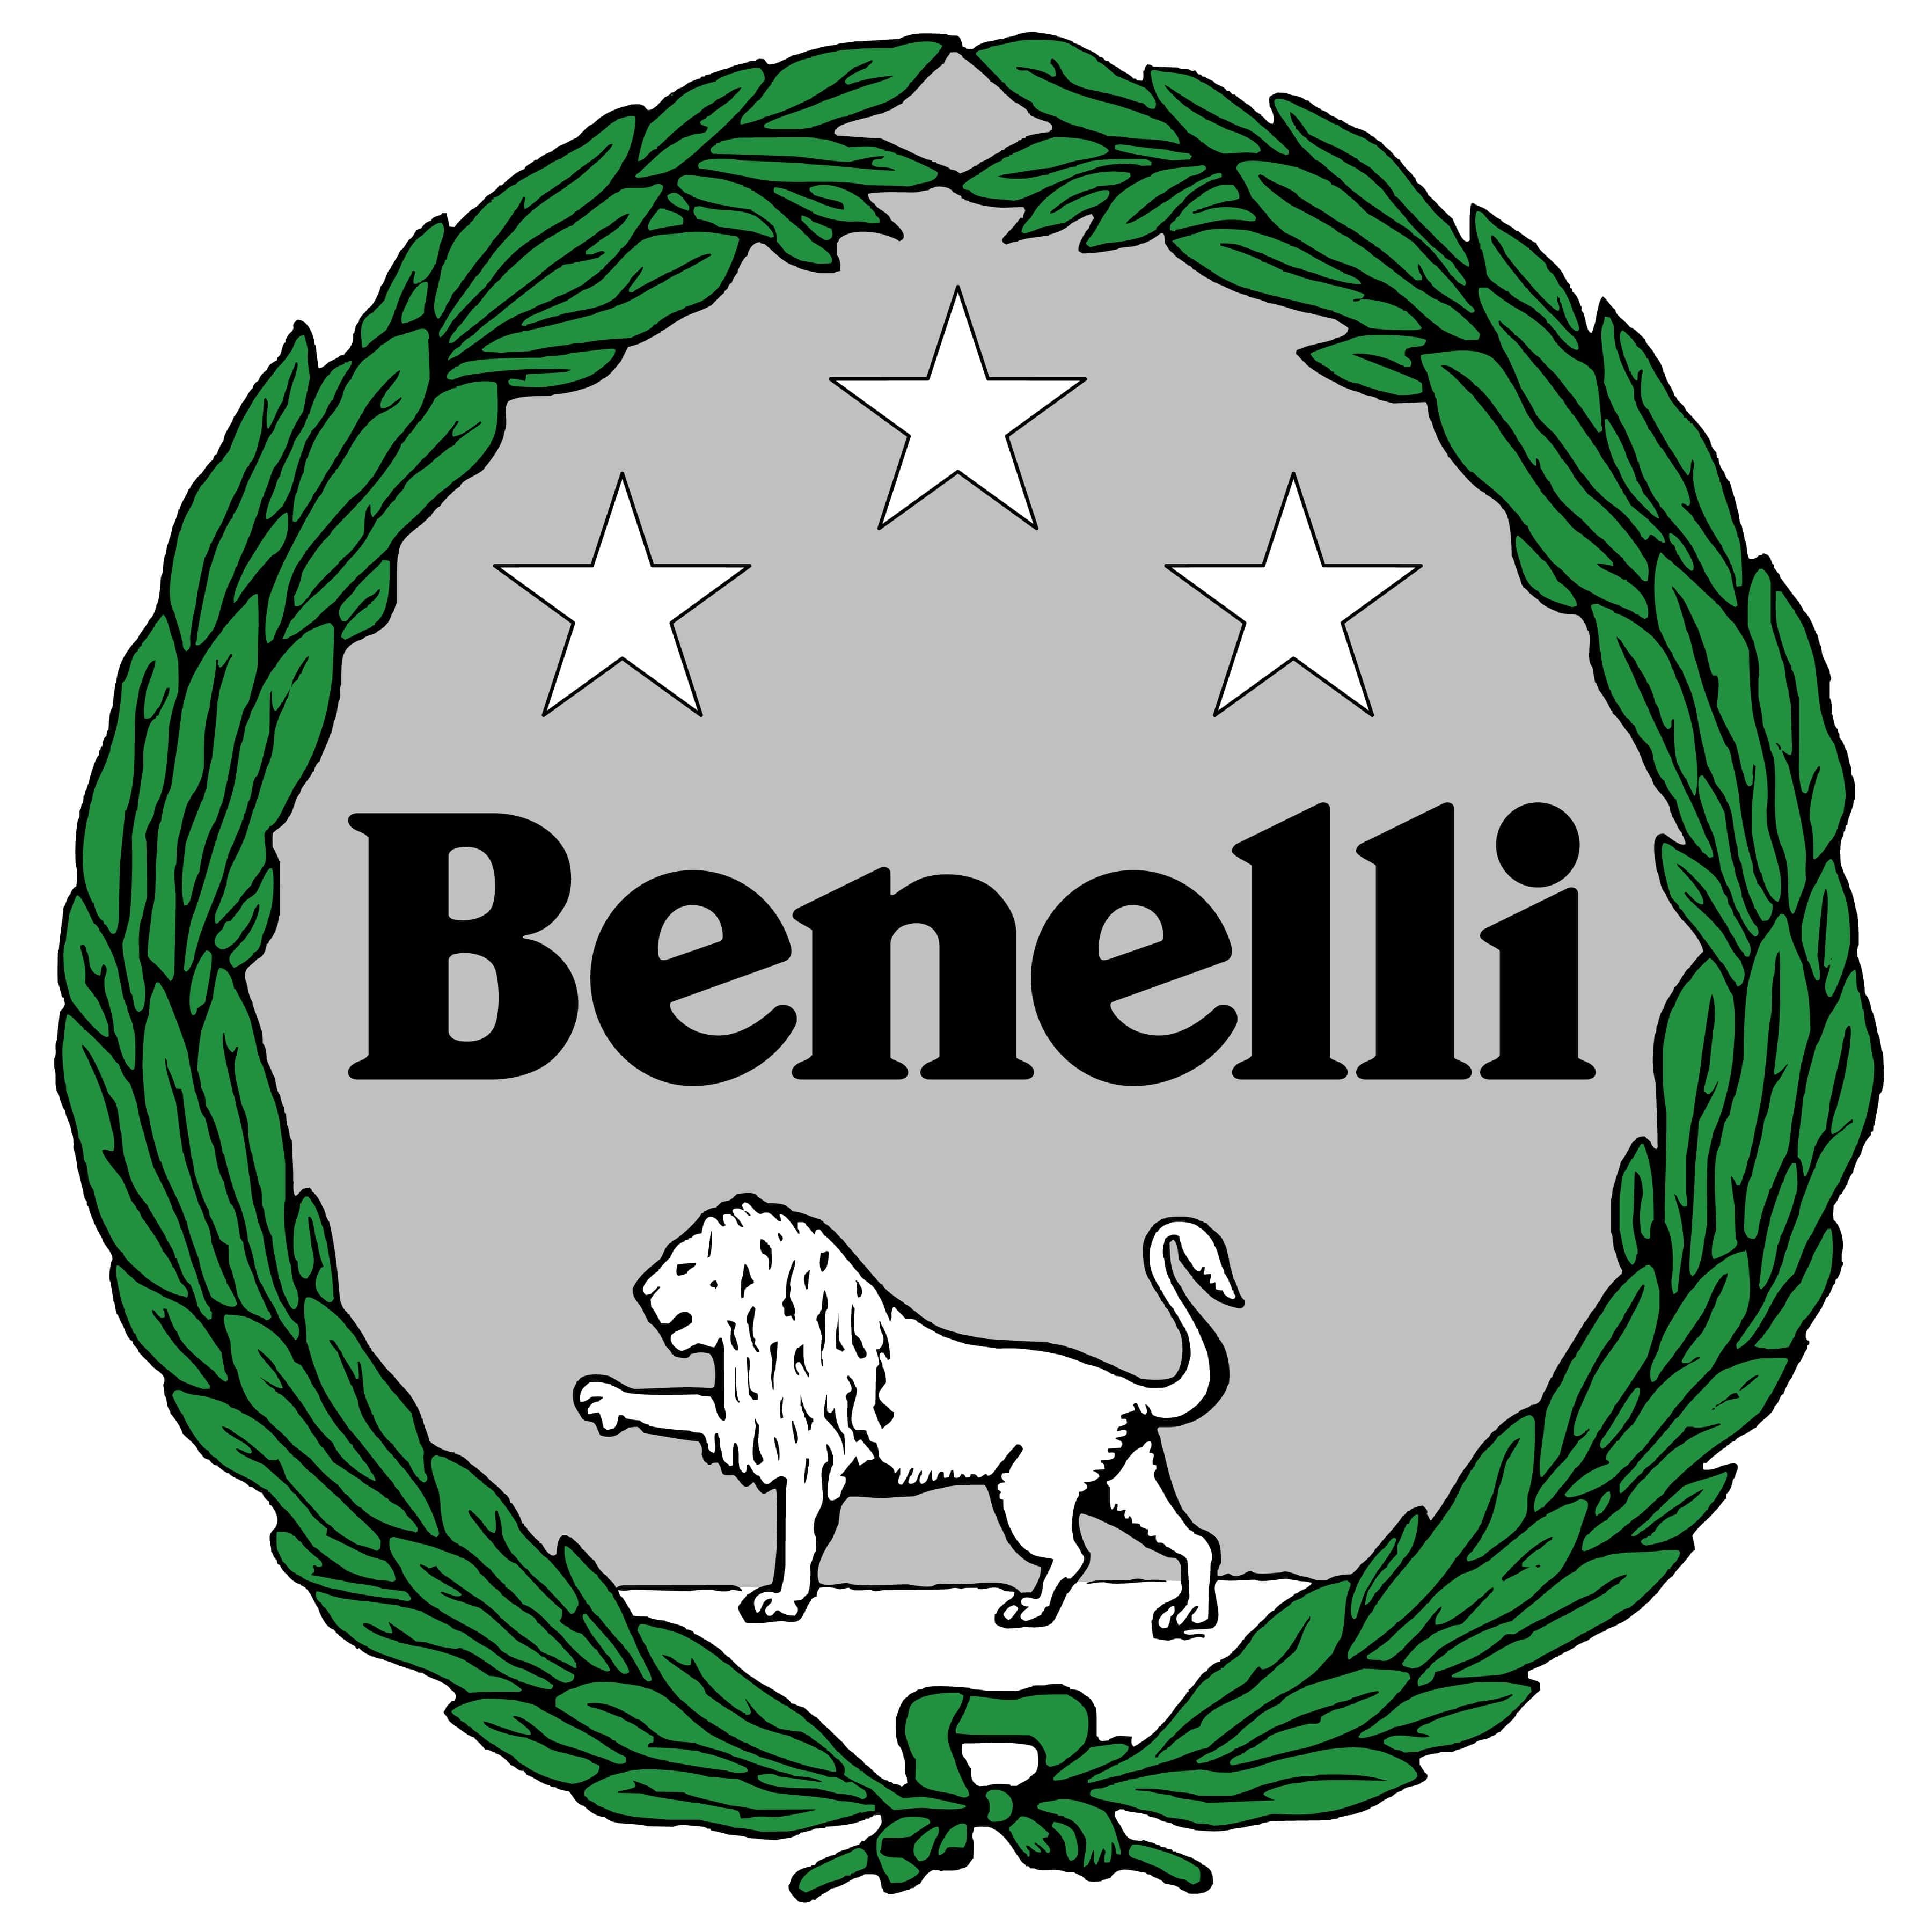 #Benelli would like to release several not yet presented models this year
- also in the app Motorcycle News